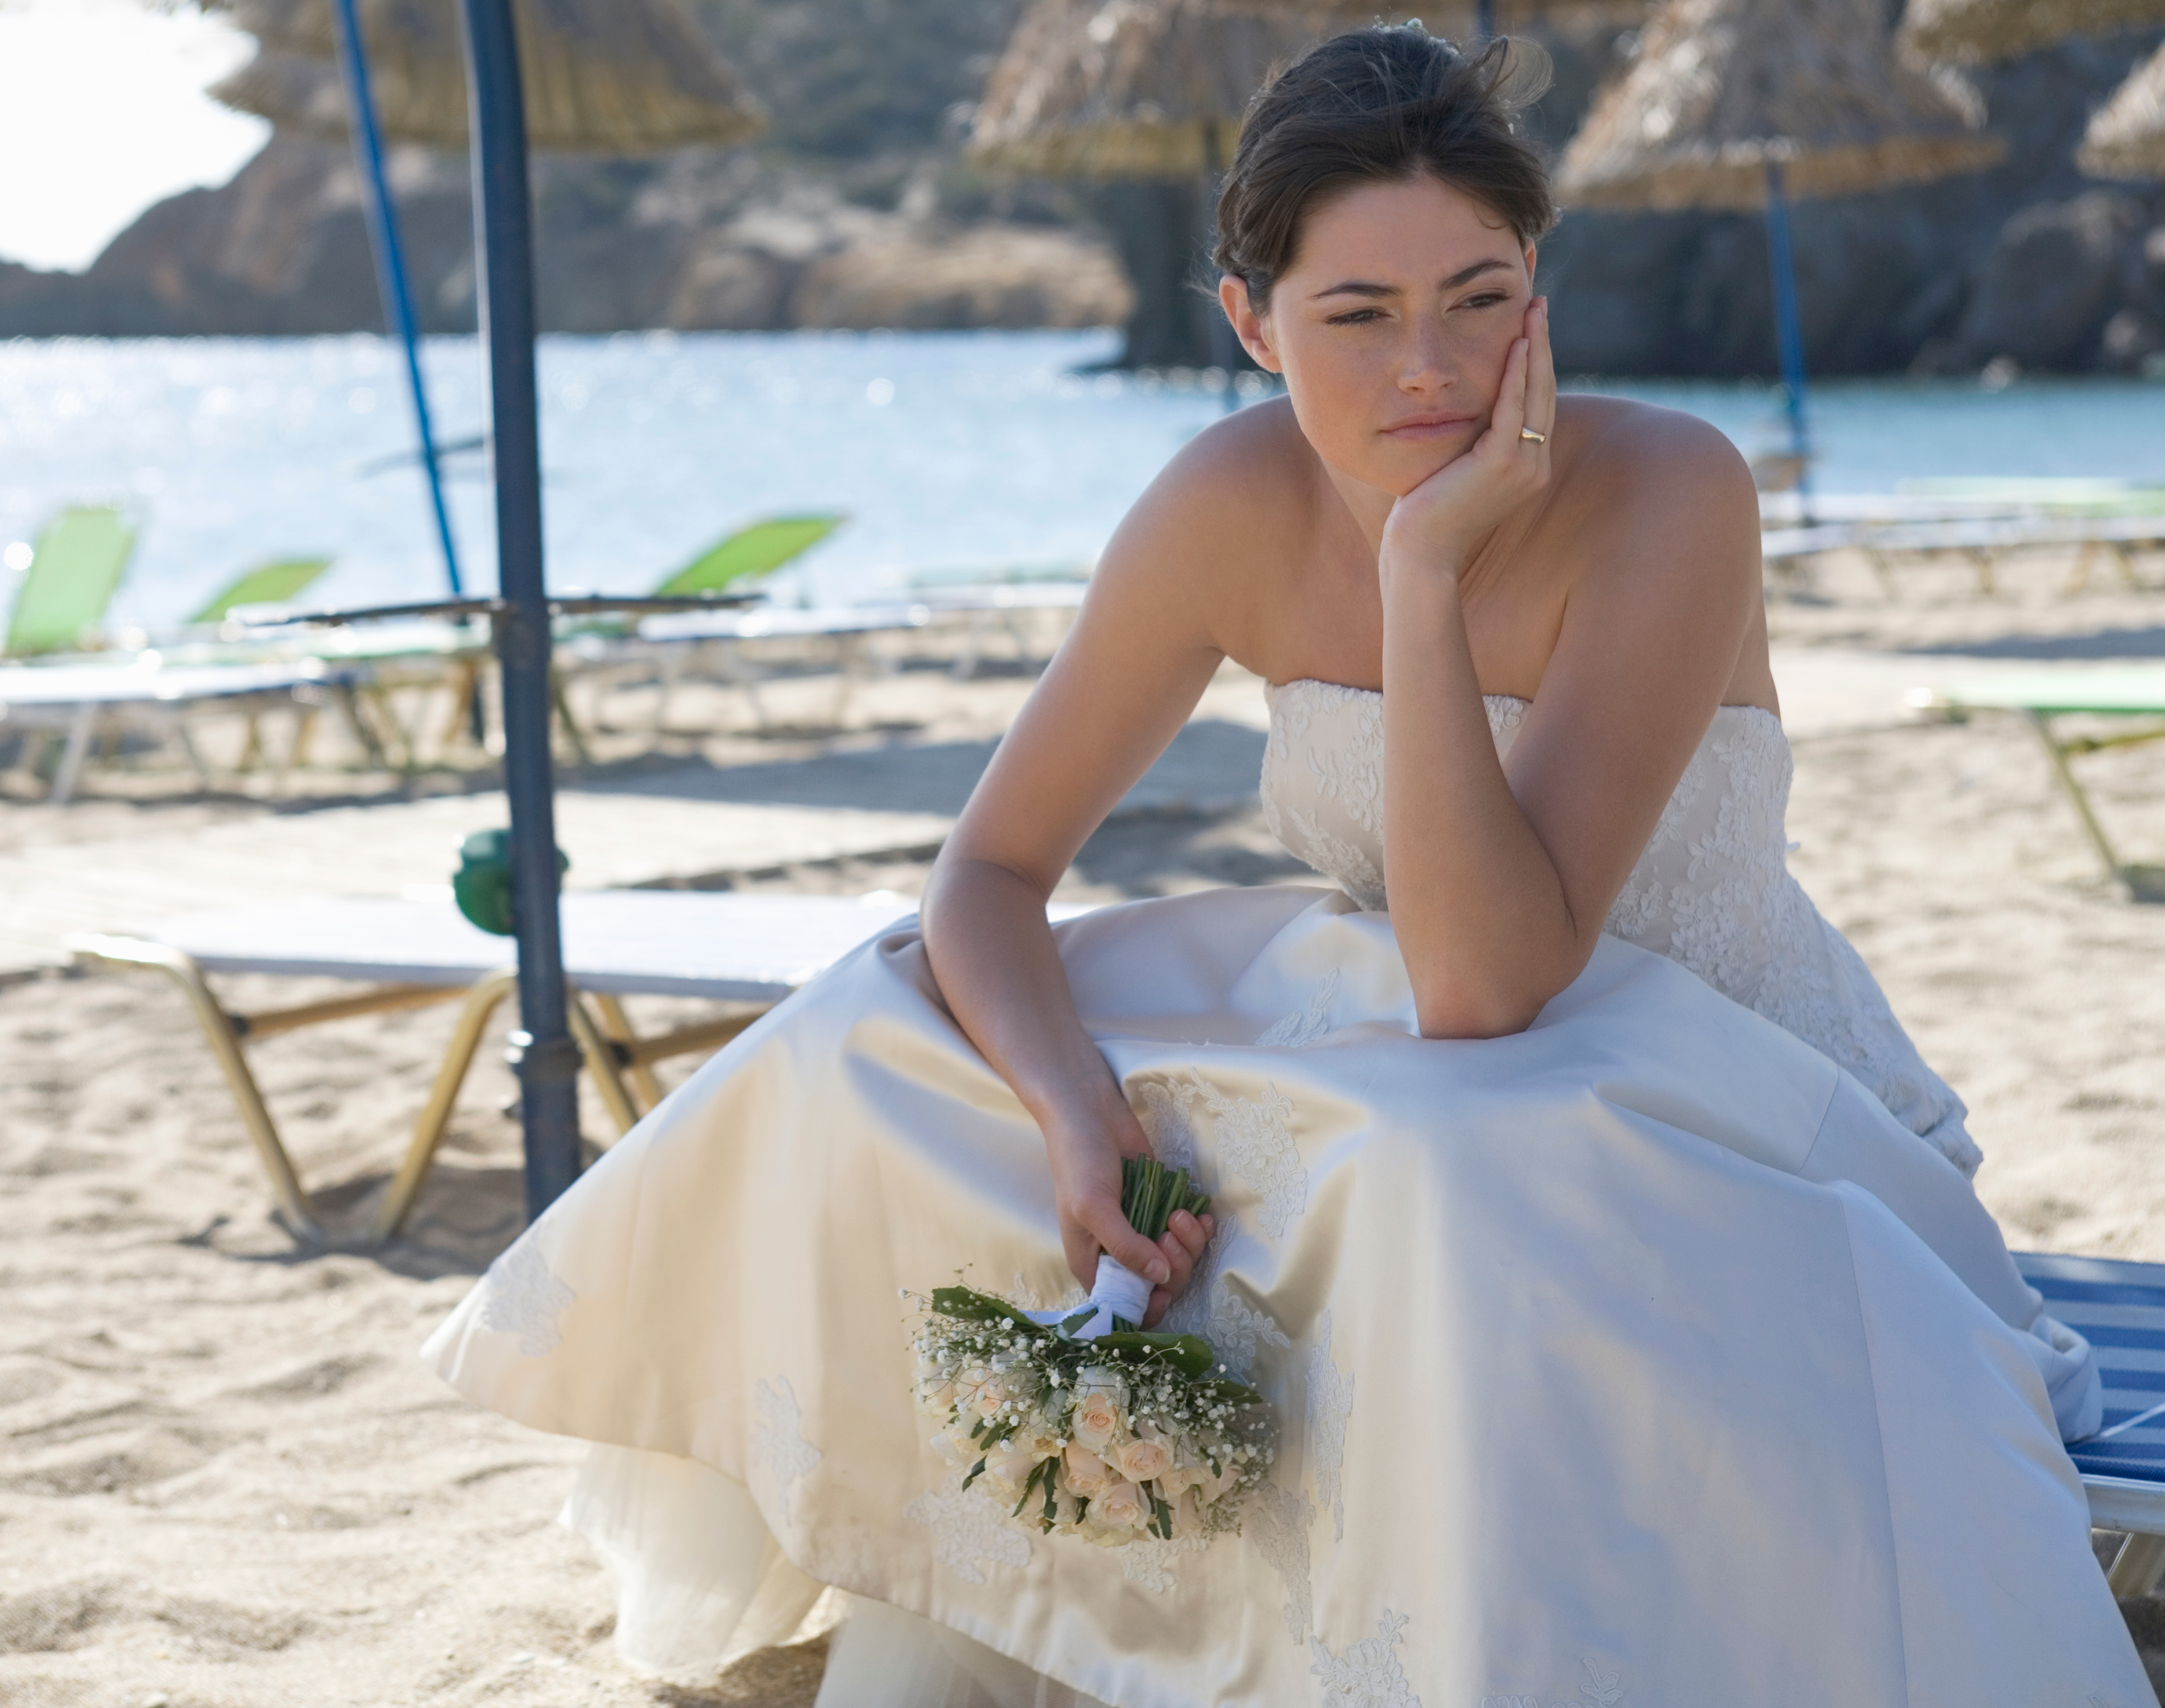 An unhappy bride is pictured sitting on a beach | Source: Shutterstock